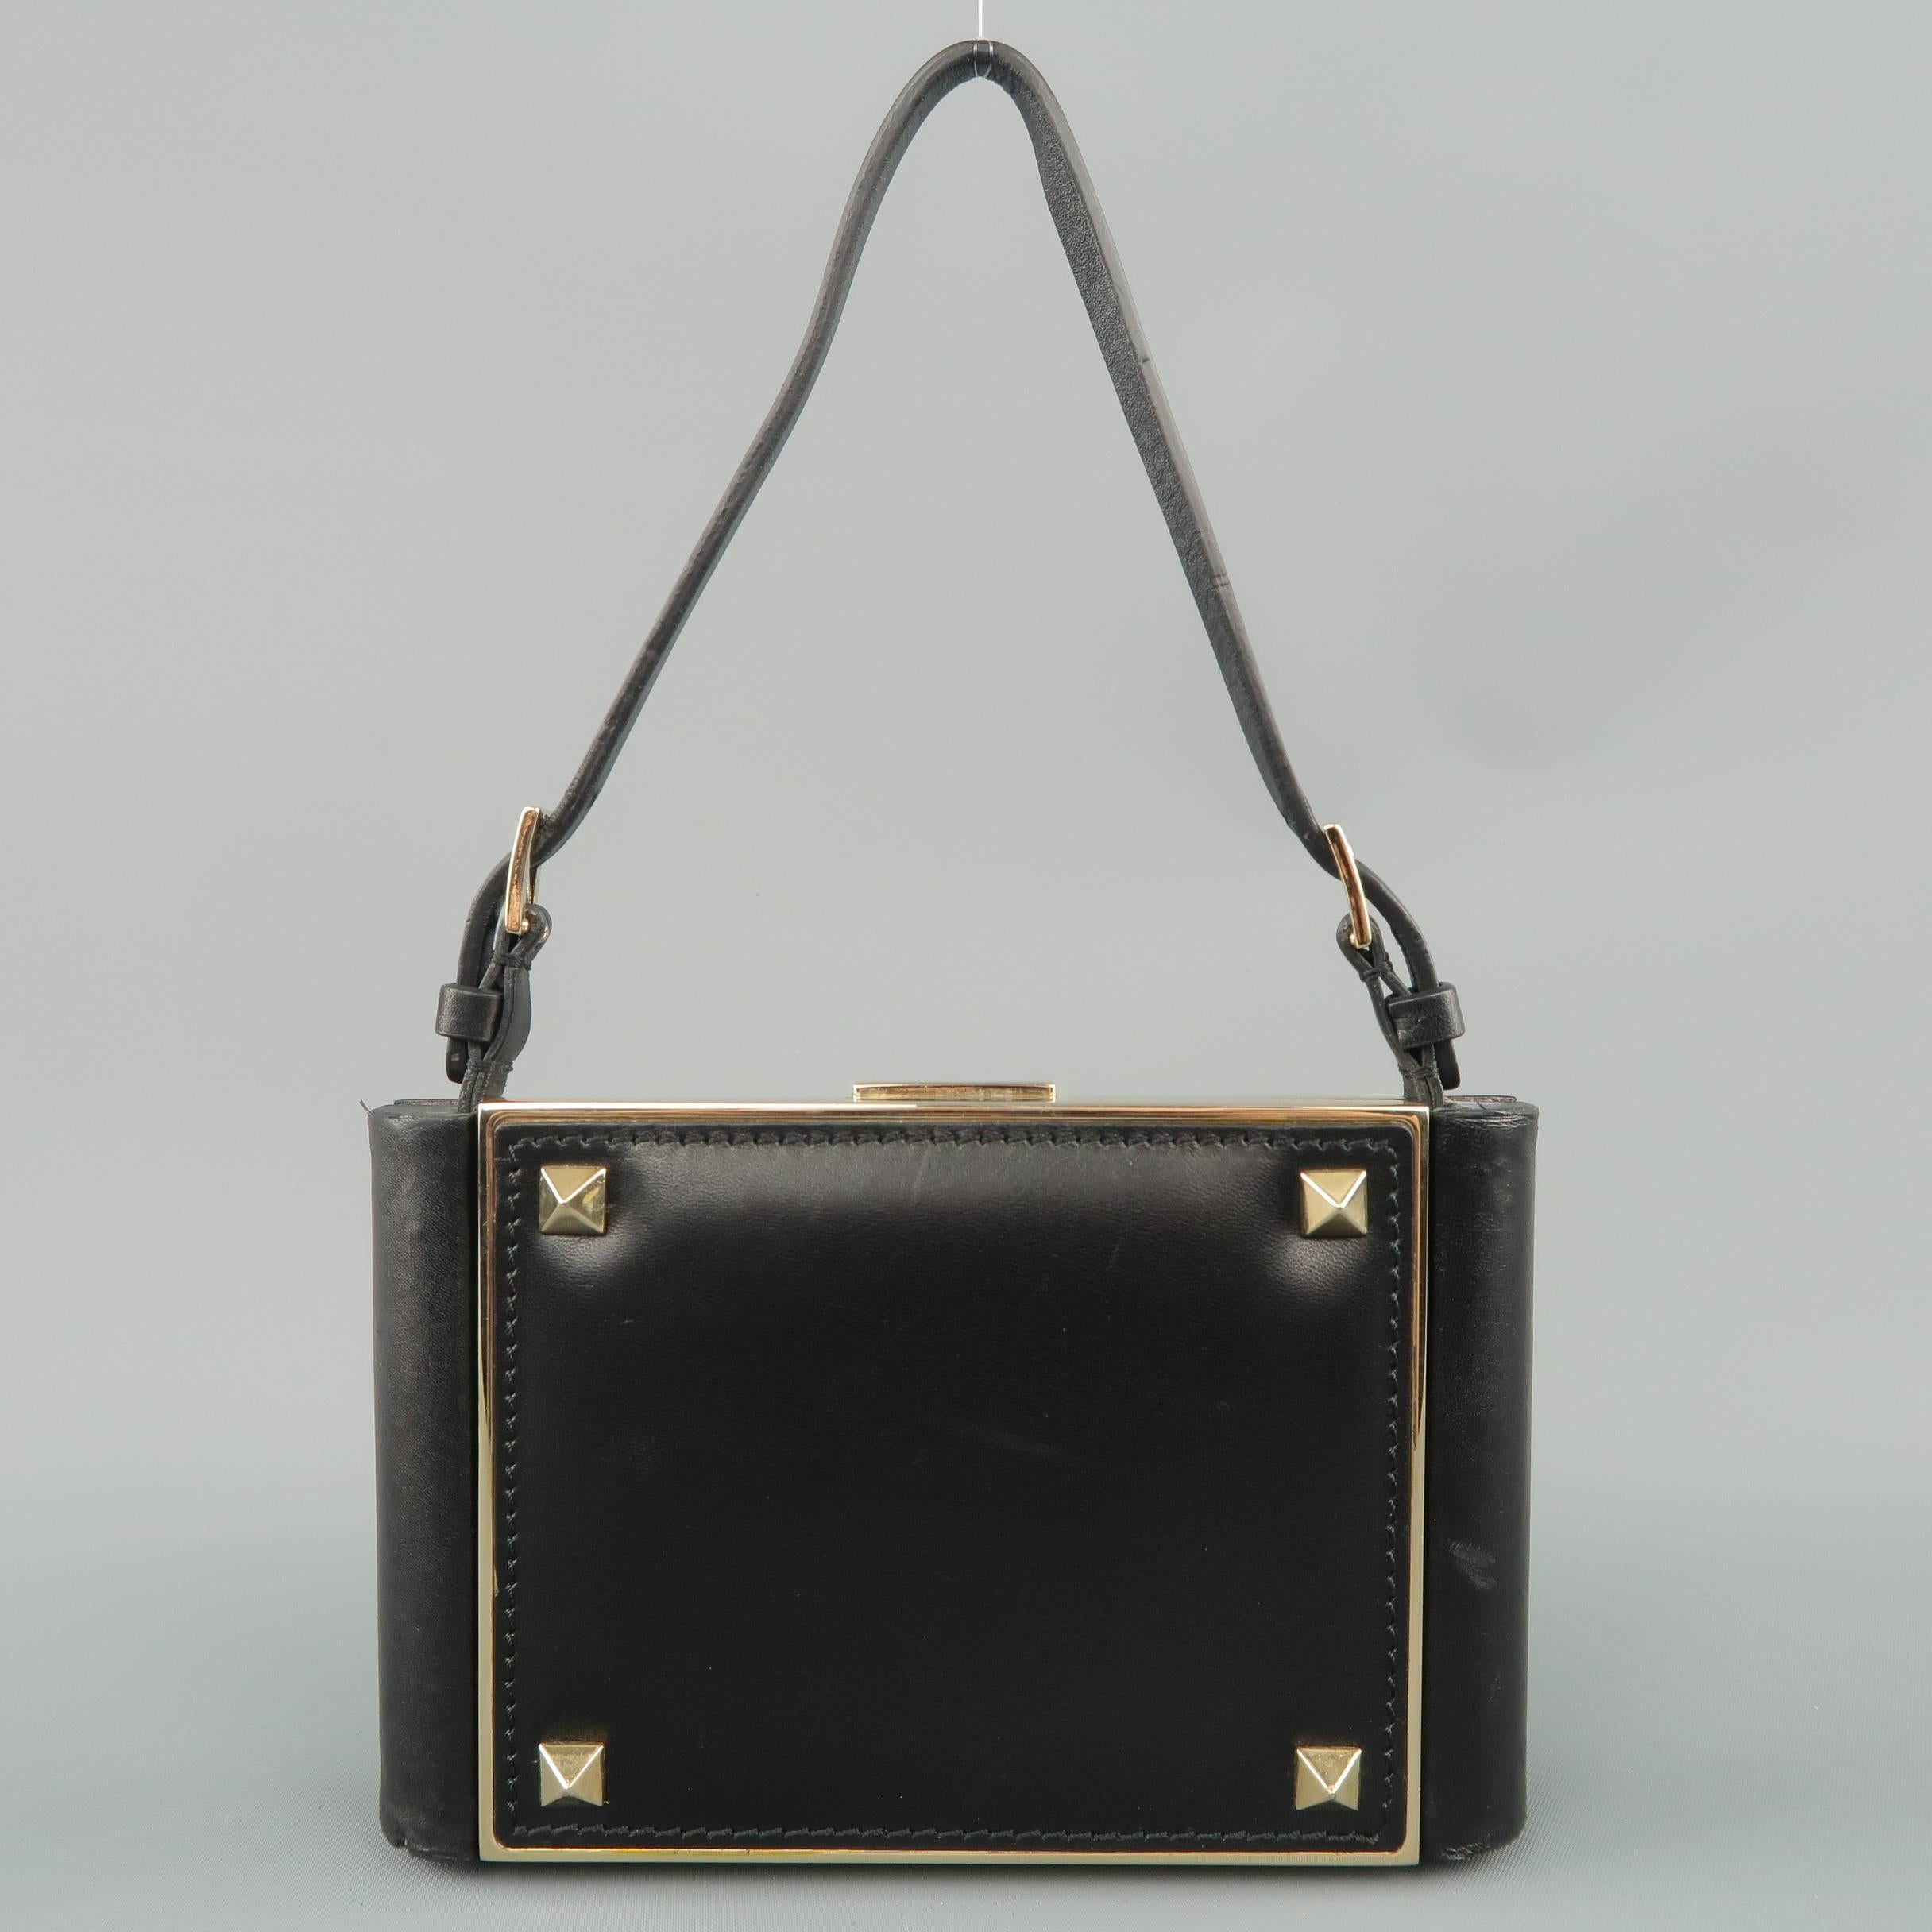 Mini VALENTINO evening purse comes in black leather with gold tone studs, a gold tone metal clasp top closure, back snap pocket, and gold tone metal chain crossbody strap. Includes optional short handle strap. Made in Italy.
 
Excellent Pre-Owned